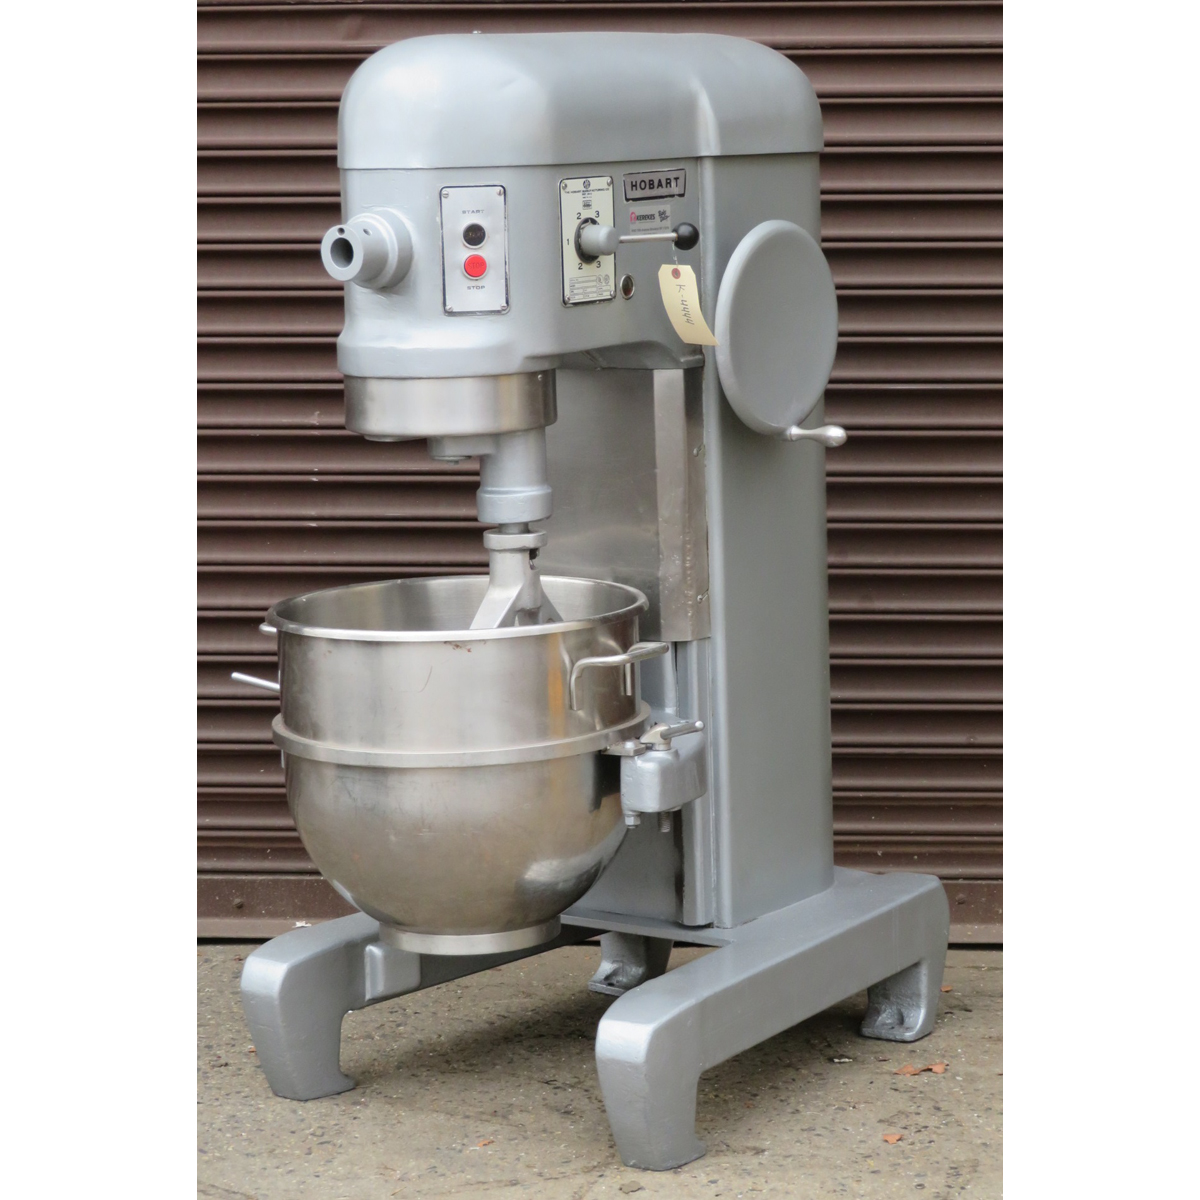 Hobart 60 Quart H600 Mixer, Used Great Condition